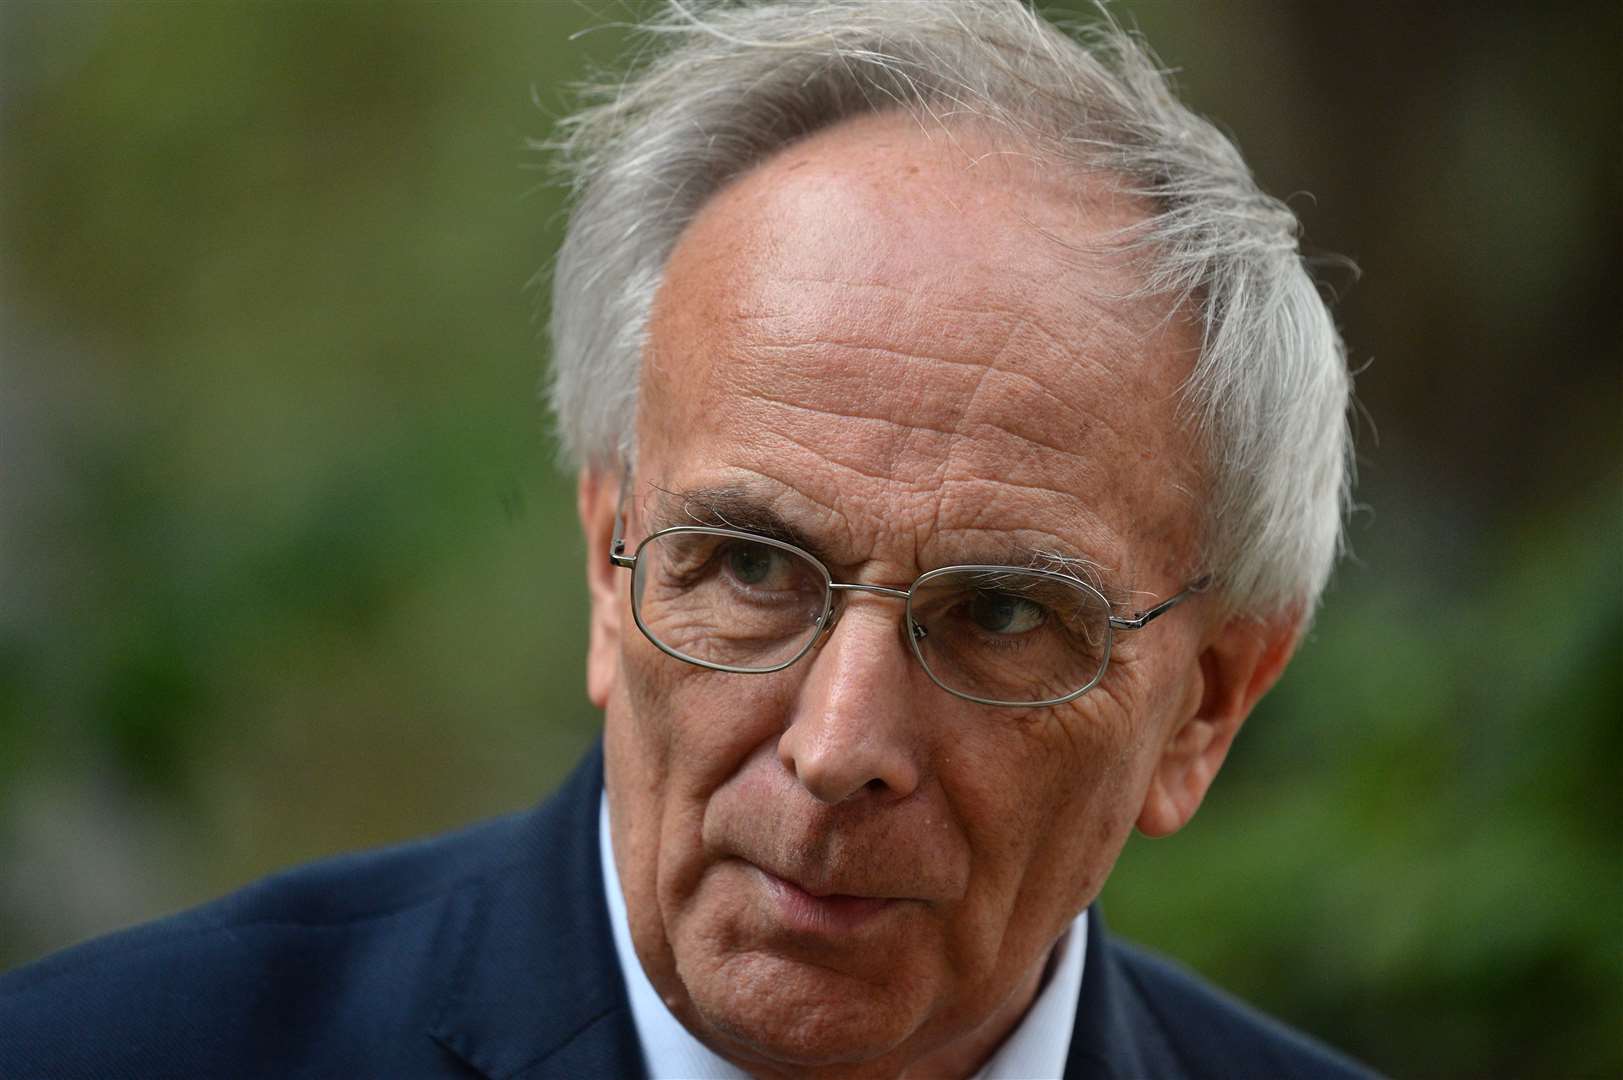 Conservative backbencher Peter Bone has signalled he could join Boris Johnson in voting against the deal (Kirsty O’Connor/PA)